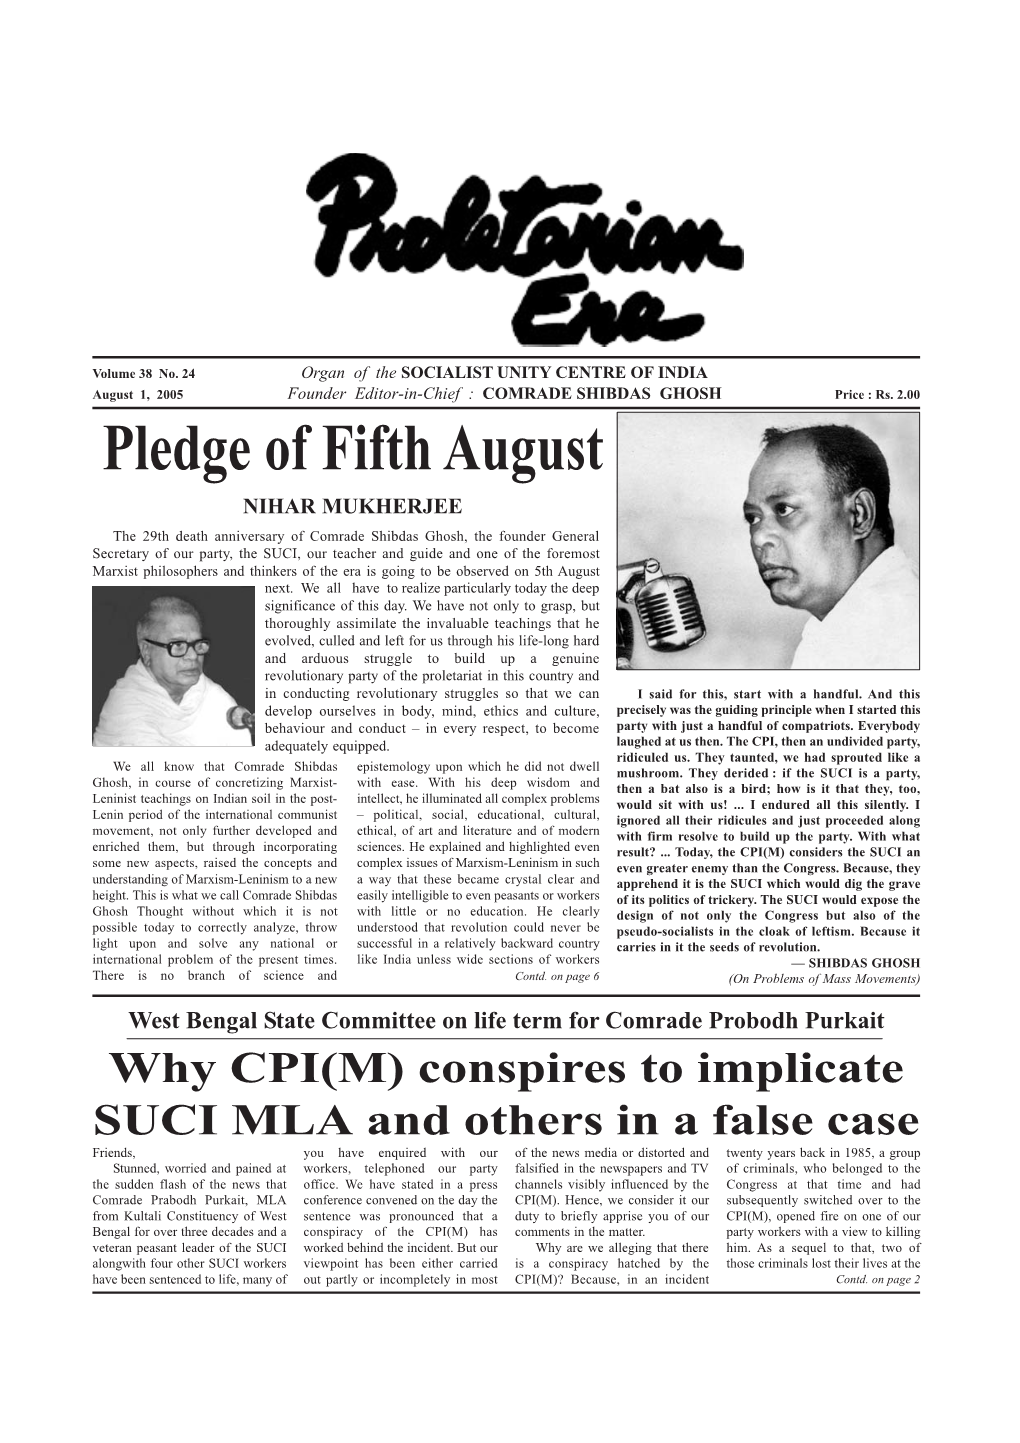 Pledge of Fifth August